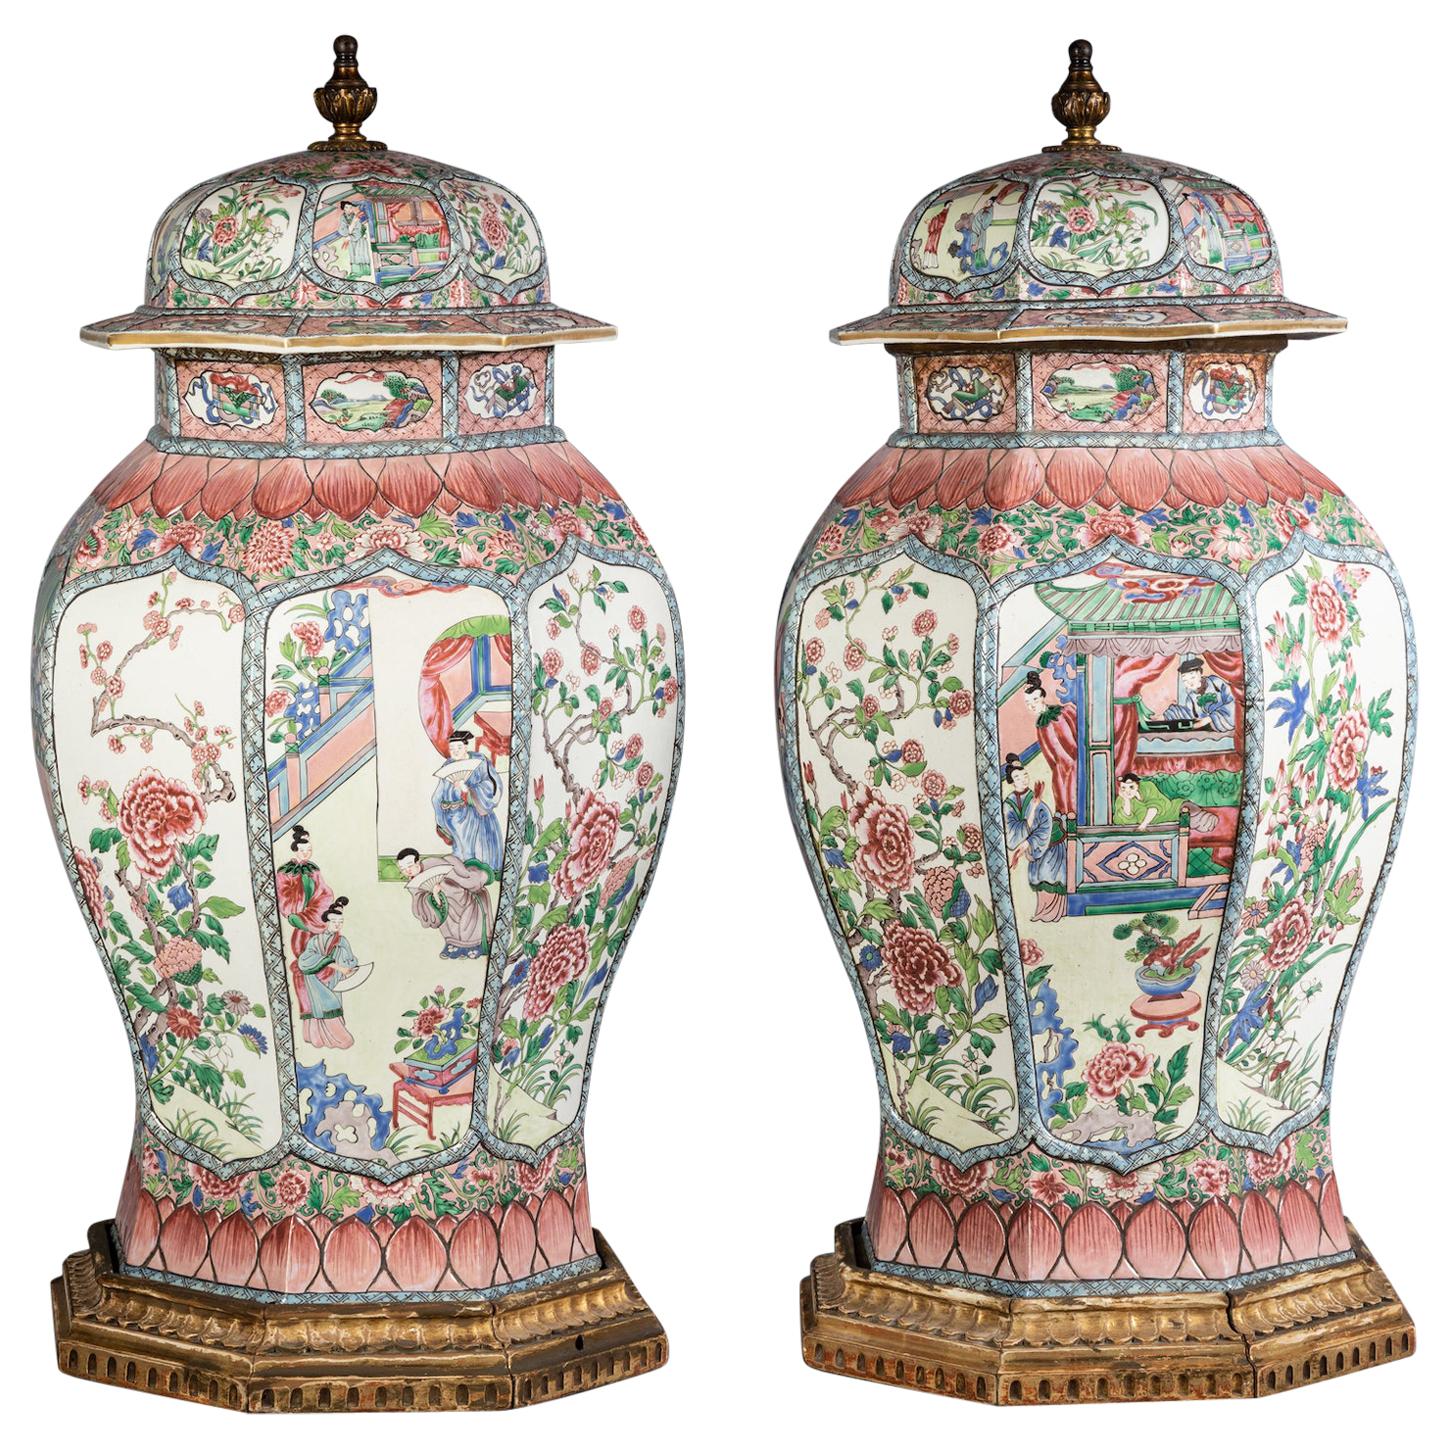 Pair of Massive French Porcelain Famille Rose Chinoiserie Covered Urns